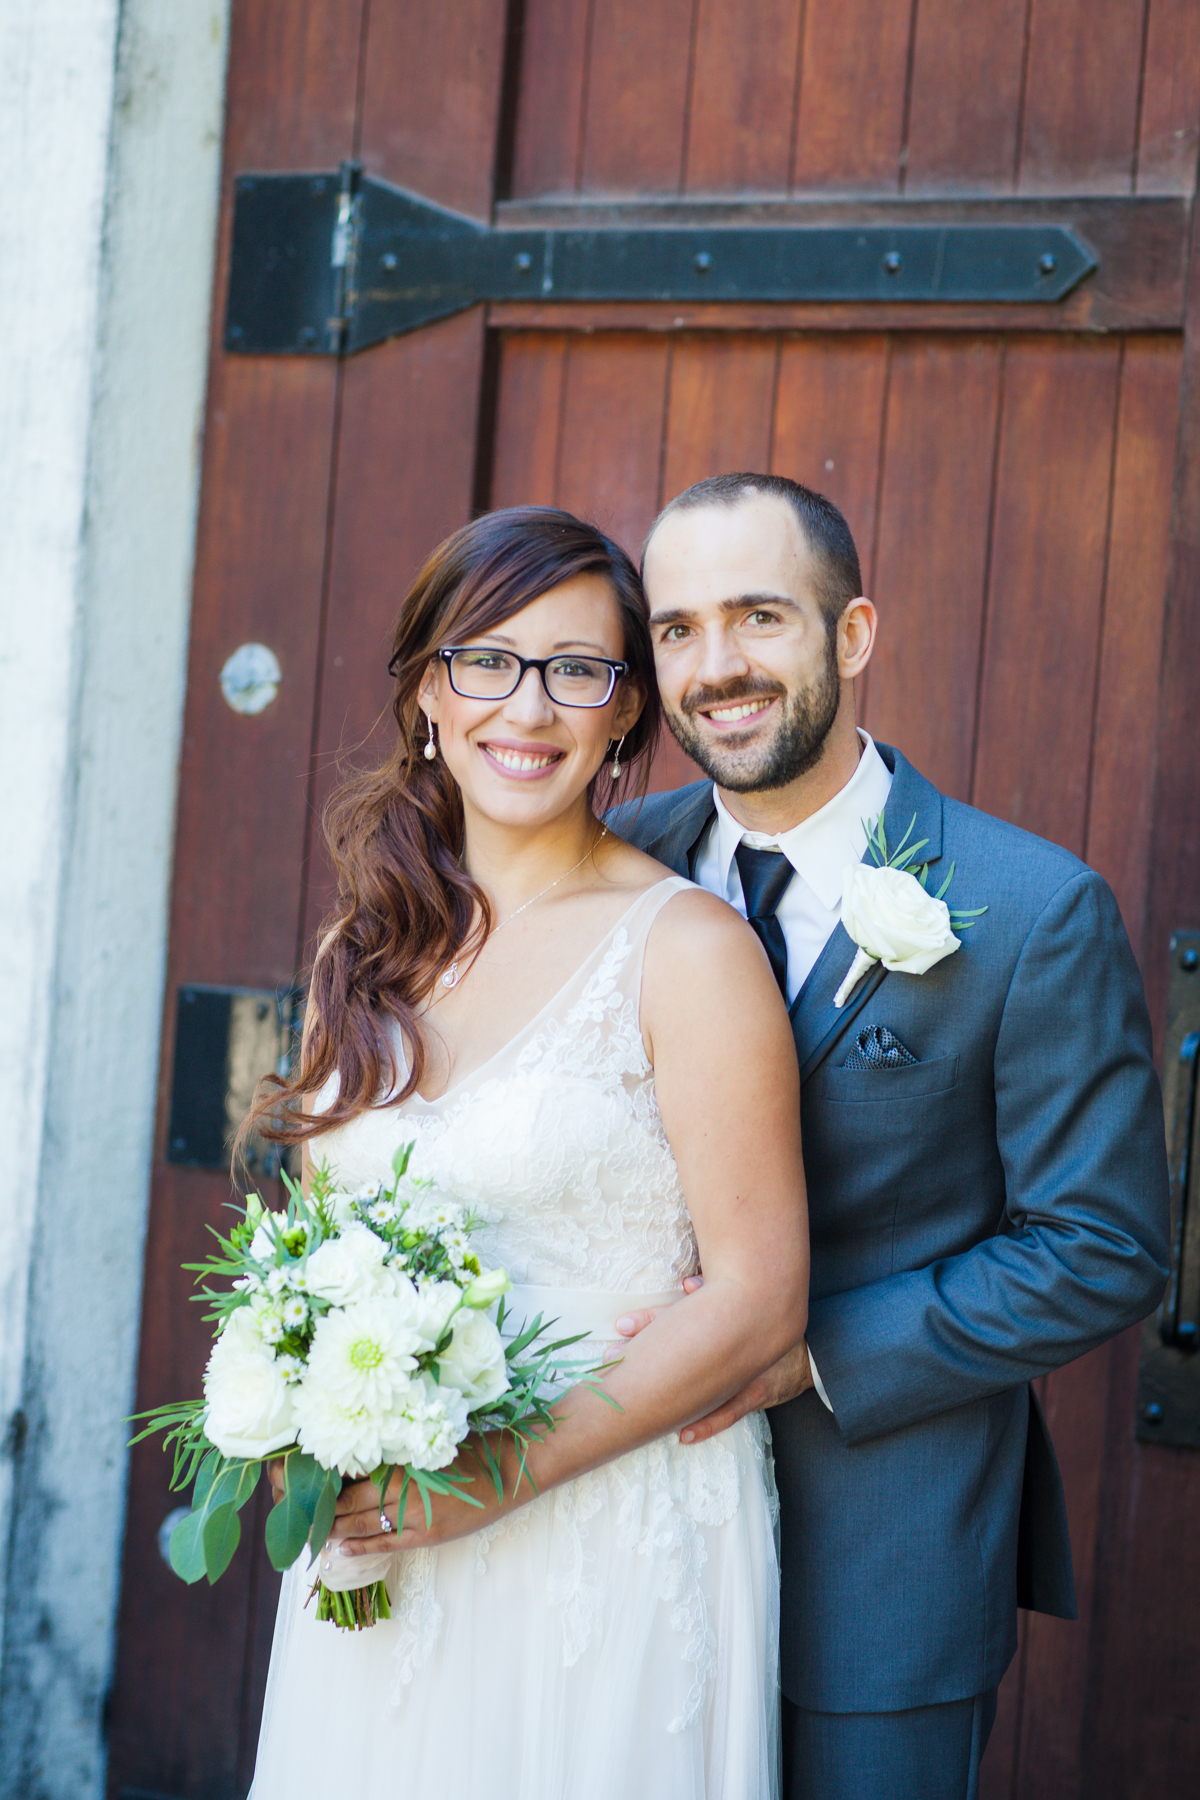 A Wente wedding full of love, warm blankets, dinosaurs and a nerf game: Sydney and Chris